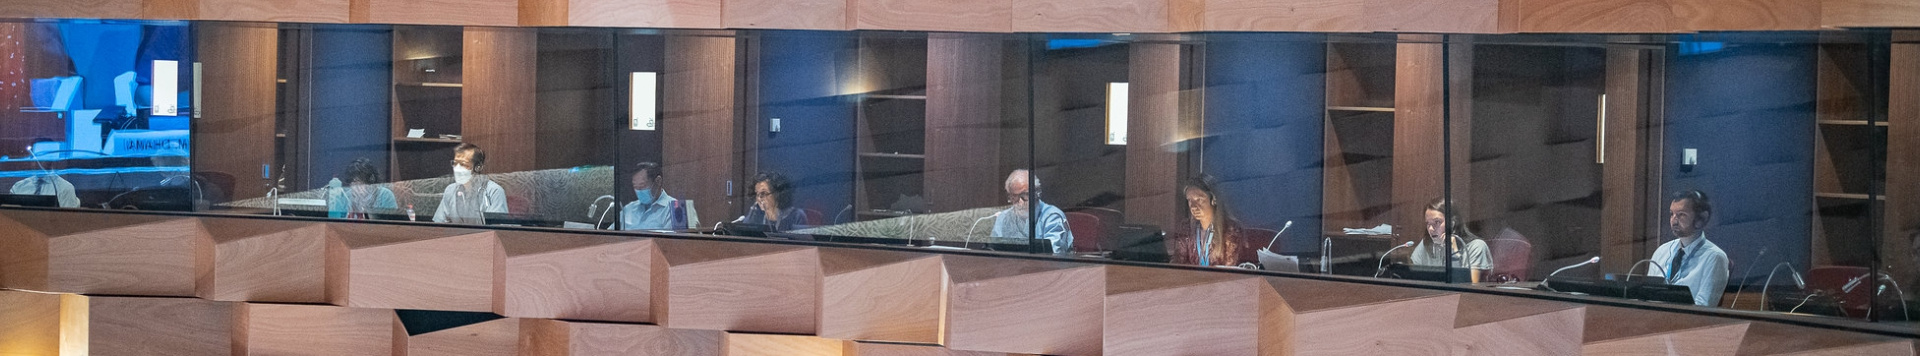 An outside view of the interpretation booths lines up inside one of UN Geneva's conference rooms.